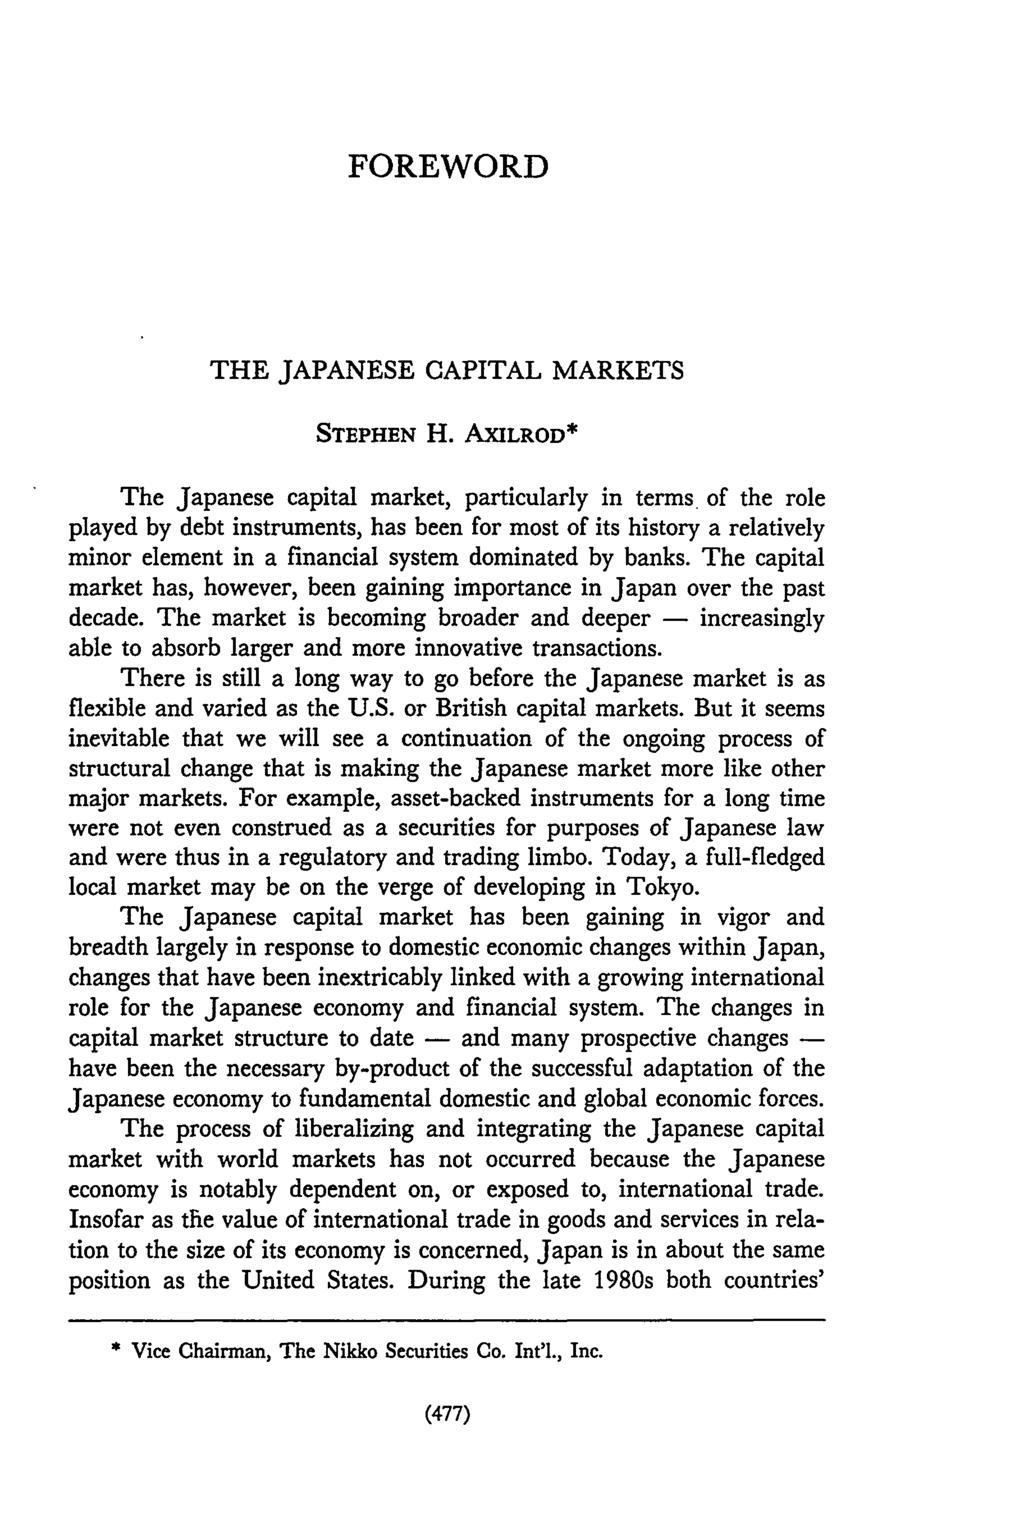 FOREWORD THE JAPANESE CAPITAL MARKETS STEPHEN H.